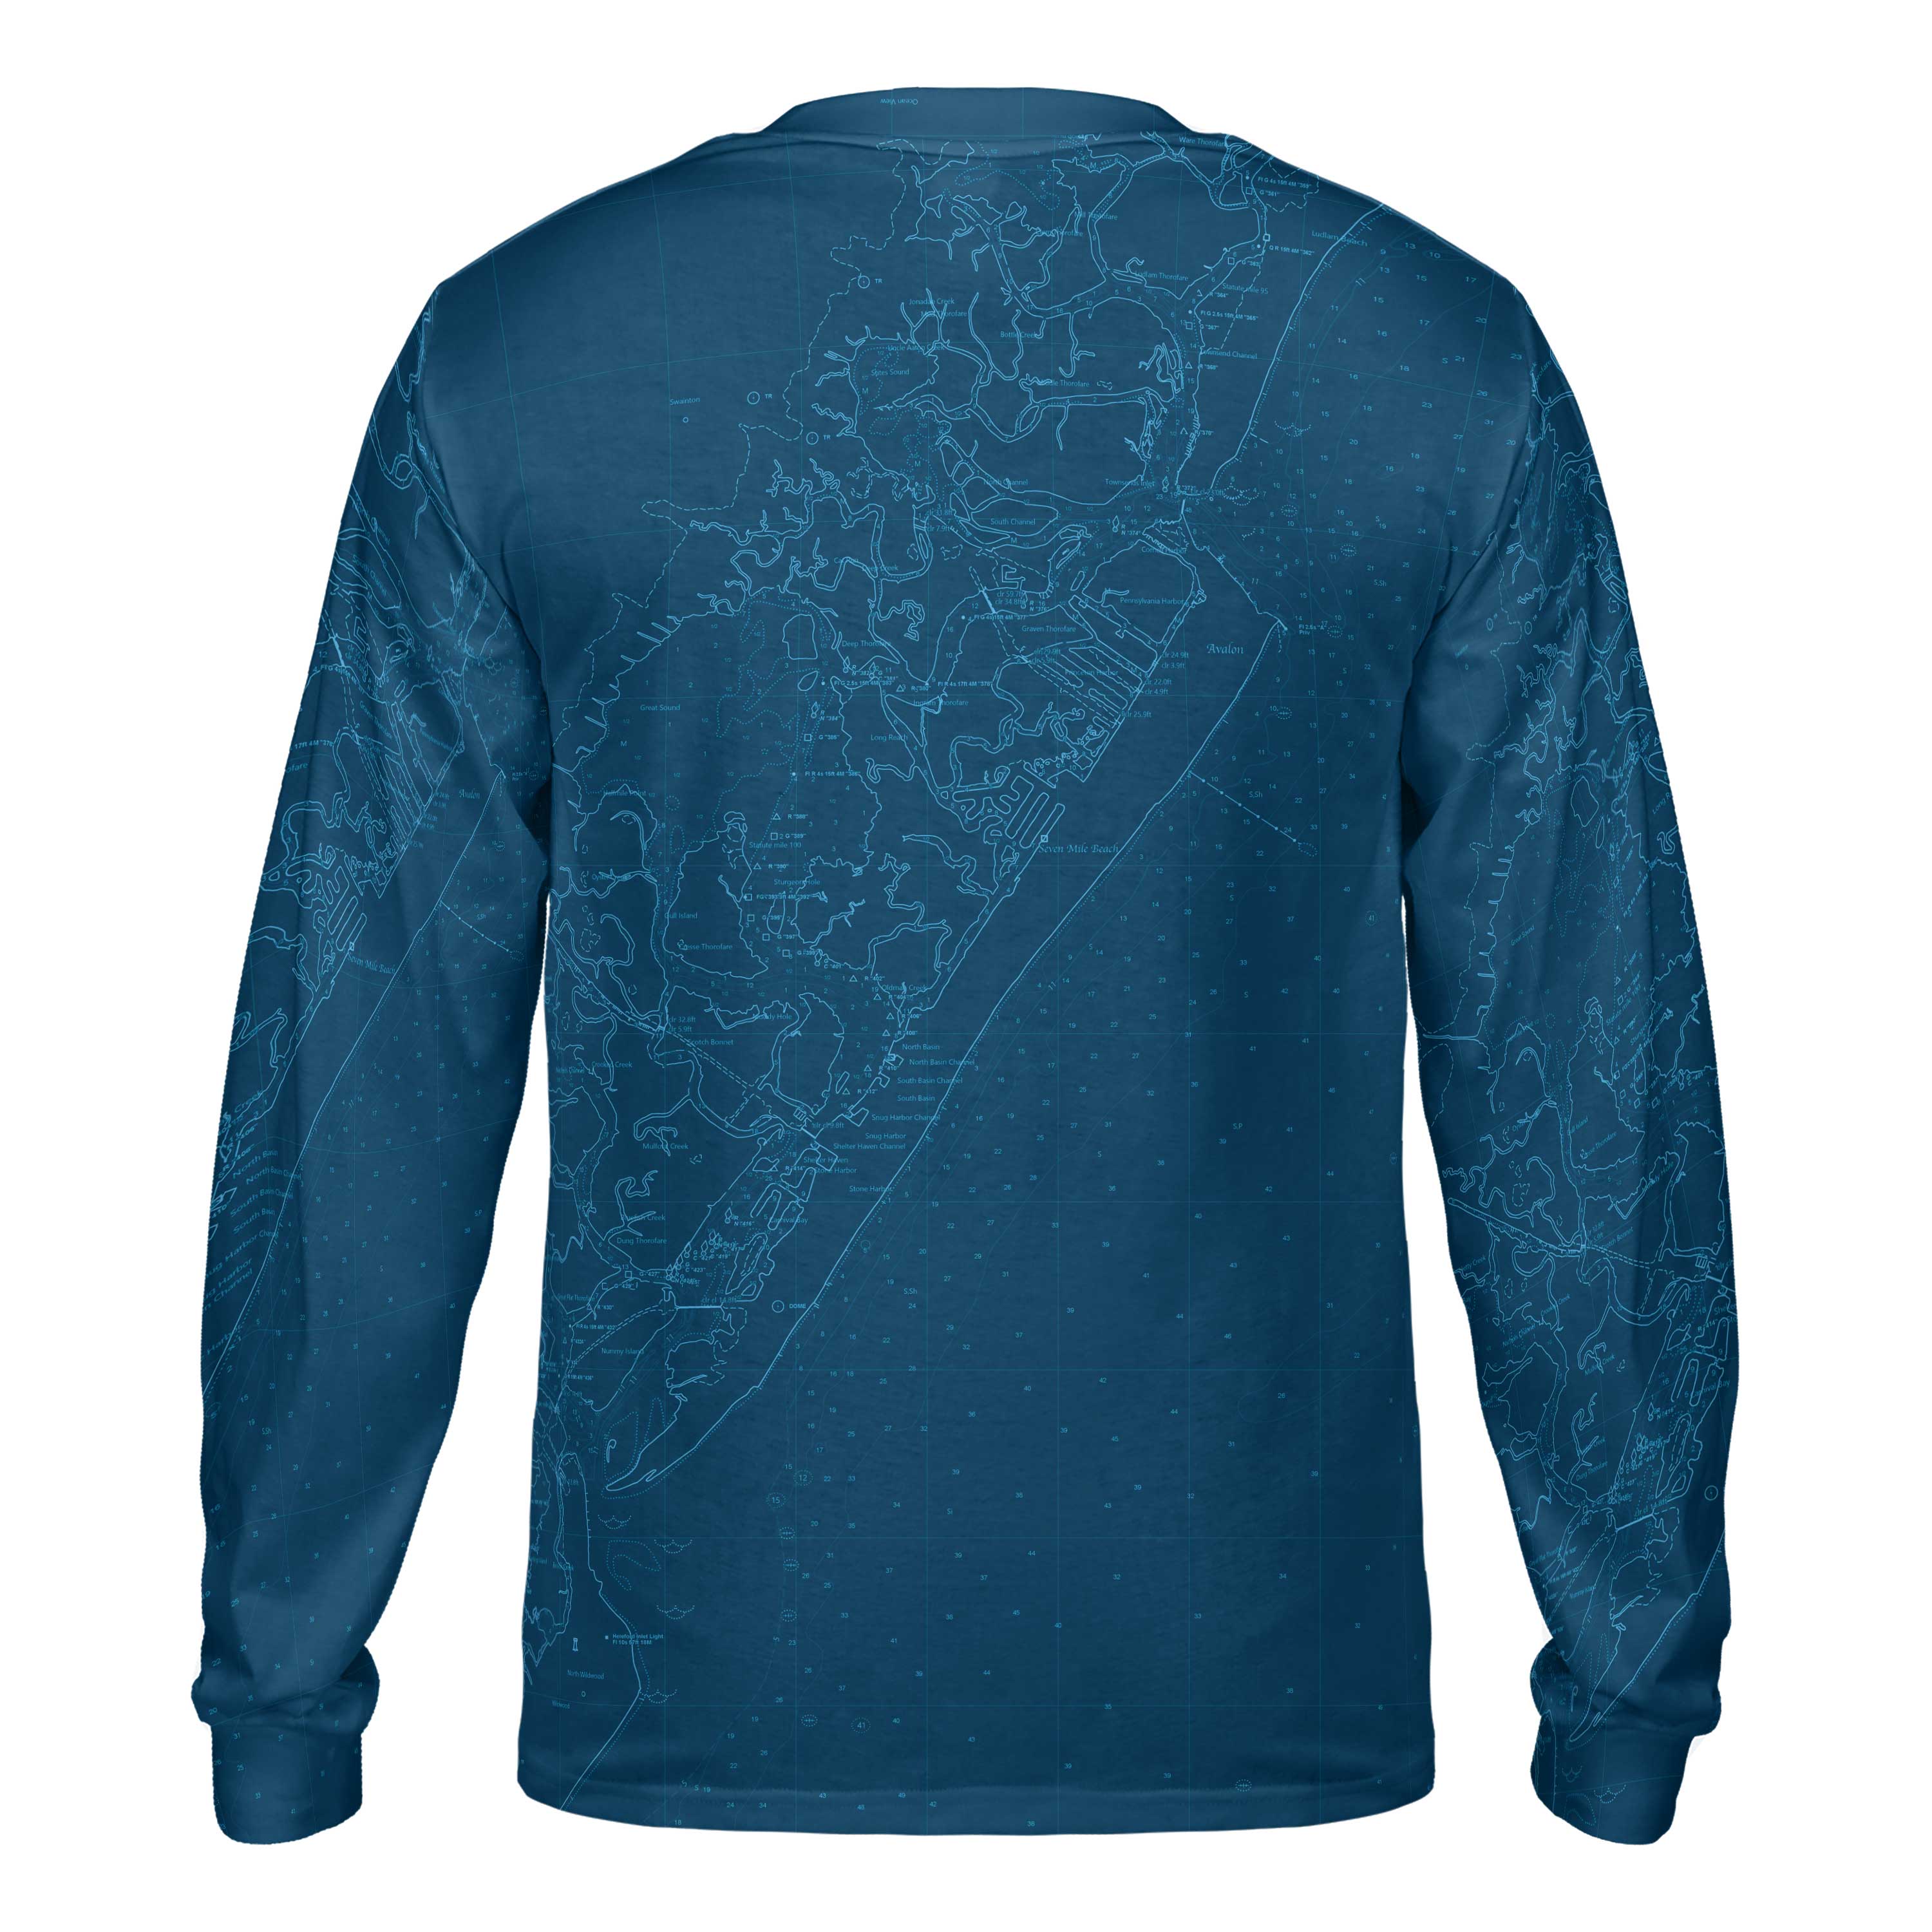 The Seven Mile Island Navy and White Long Sleeve Tee